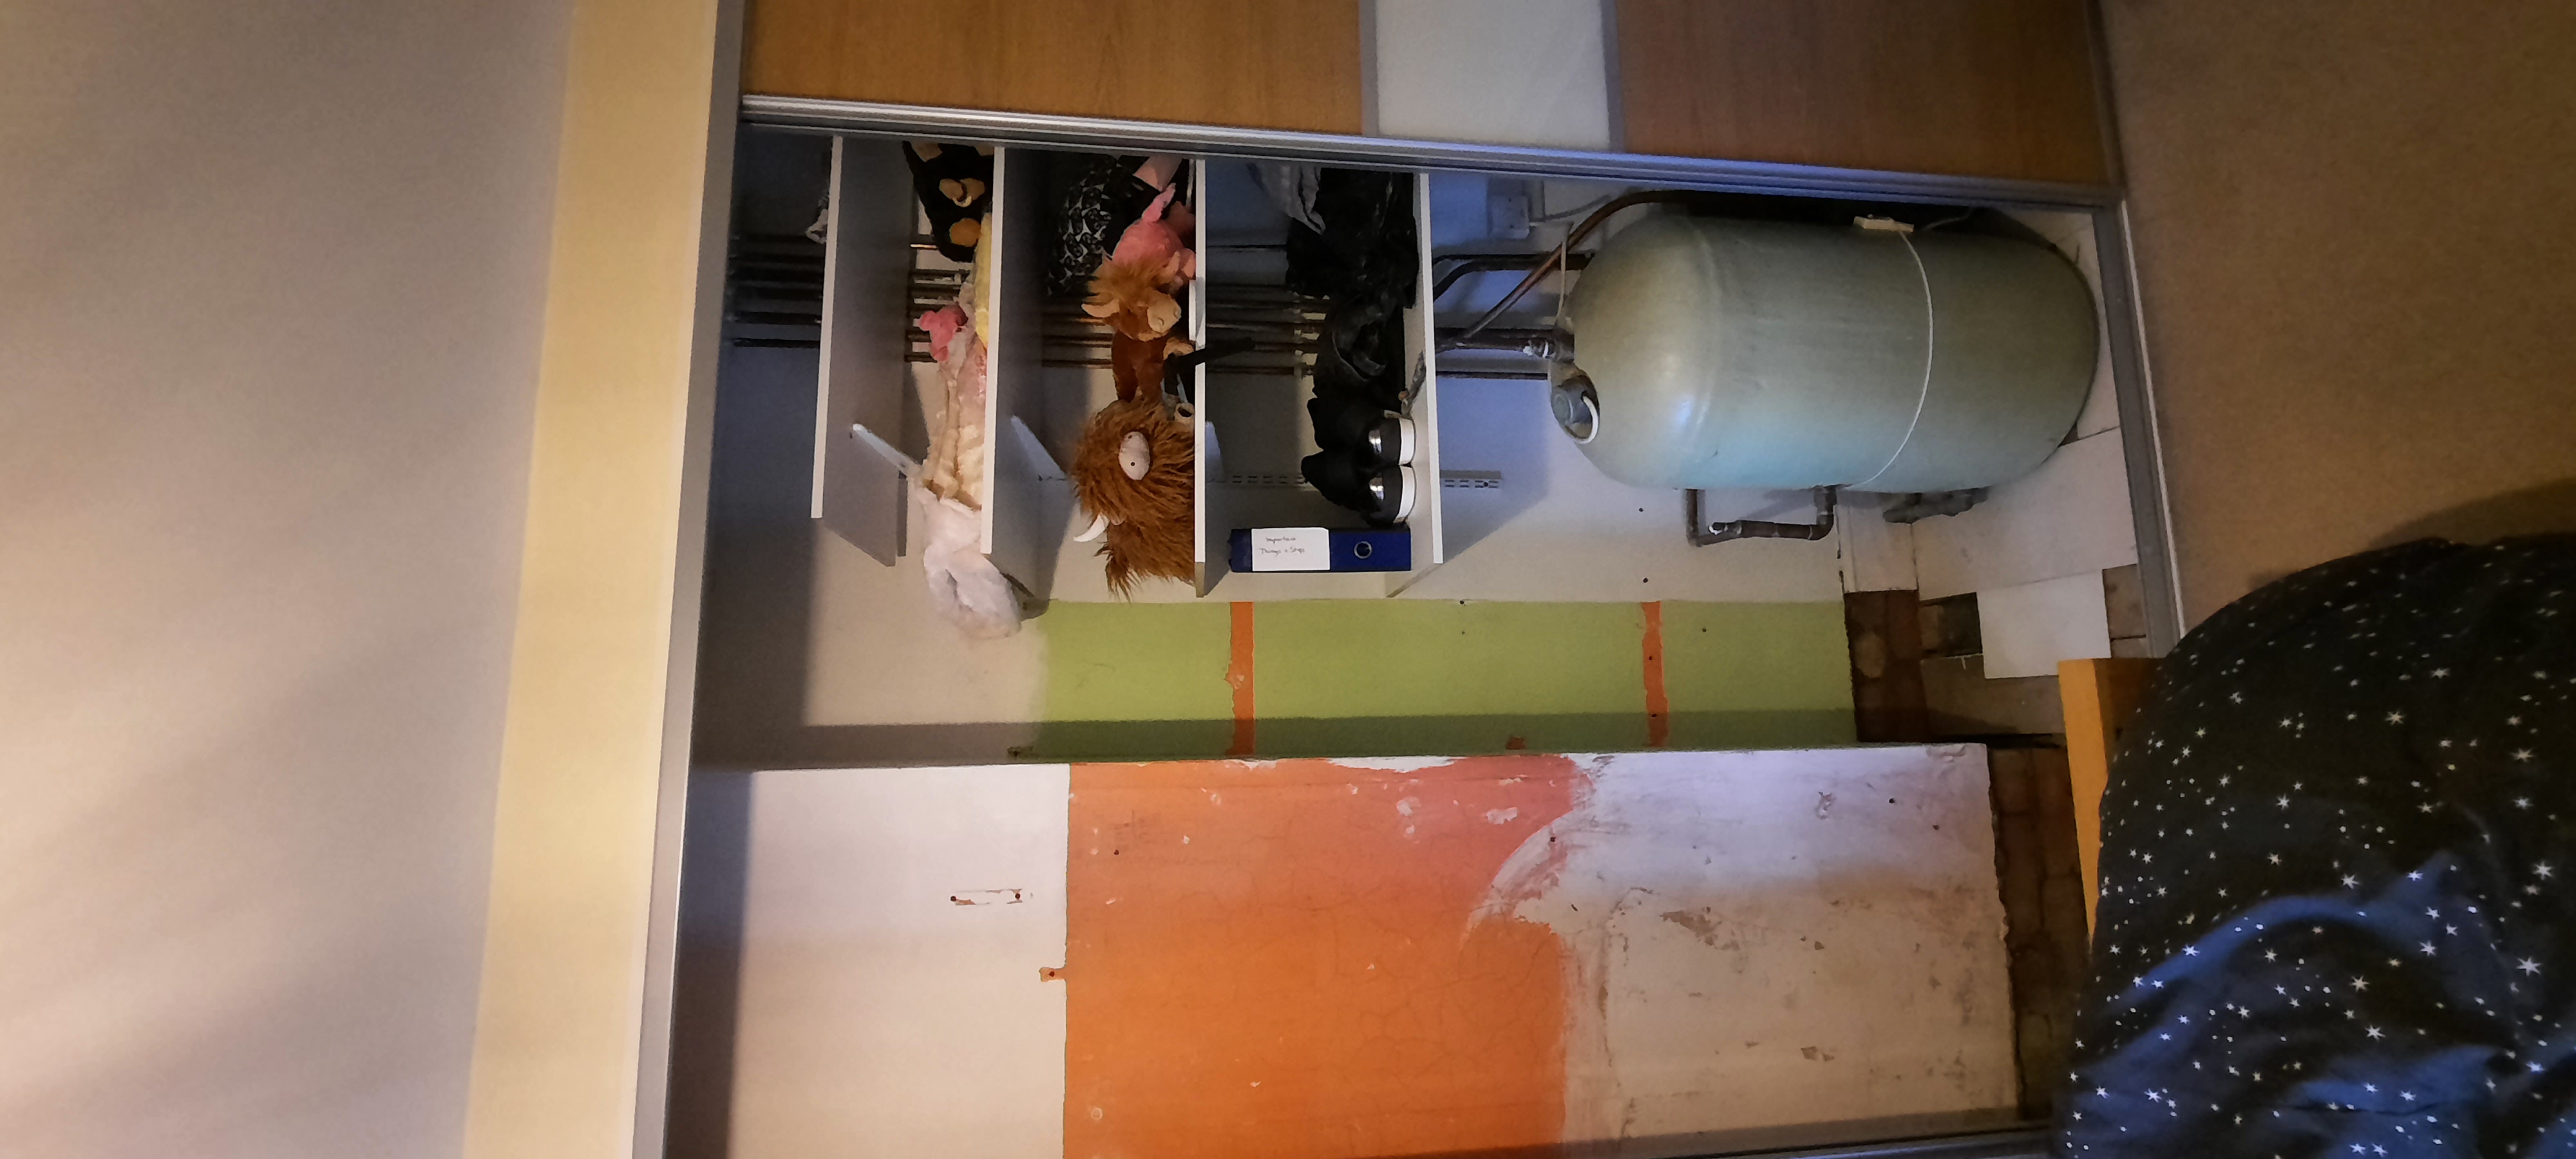 Image for Hot water tank/airing cupboard